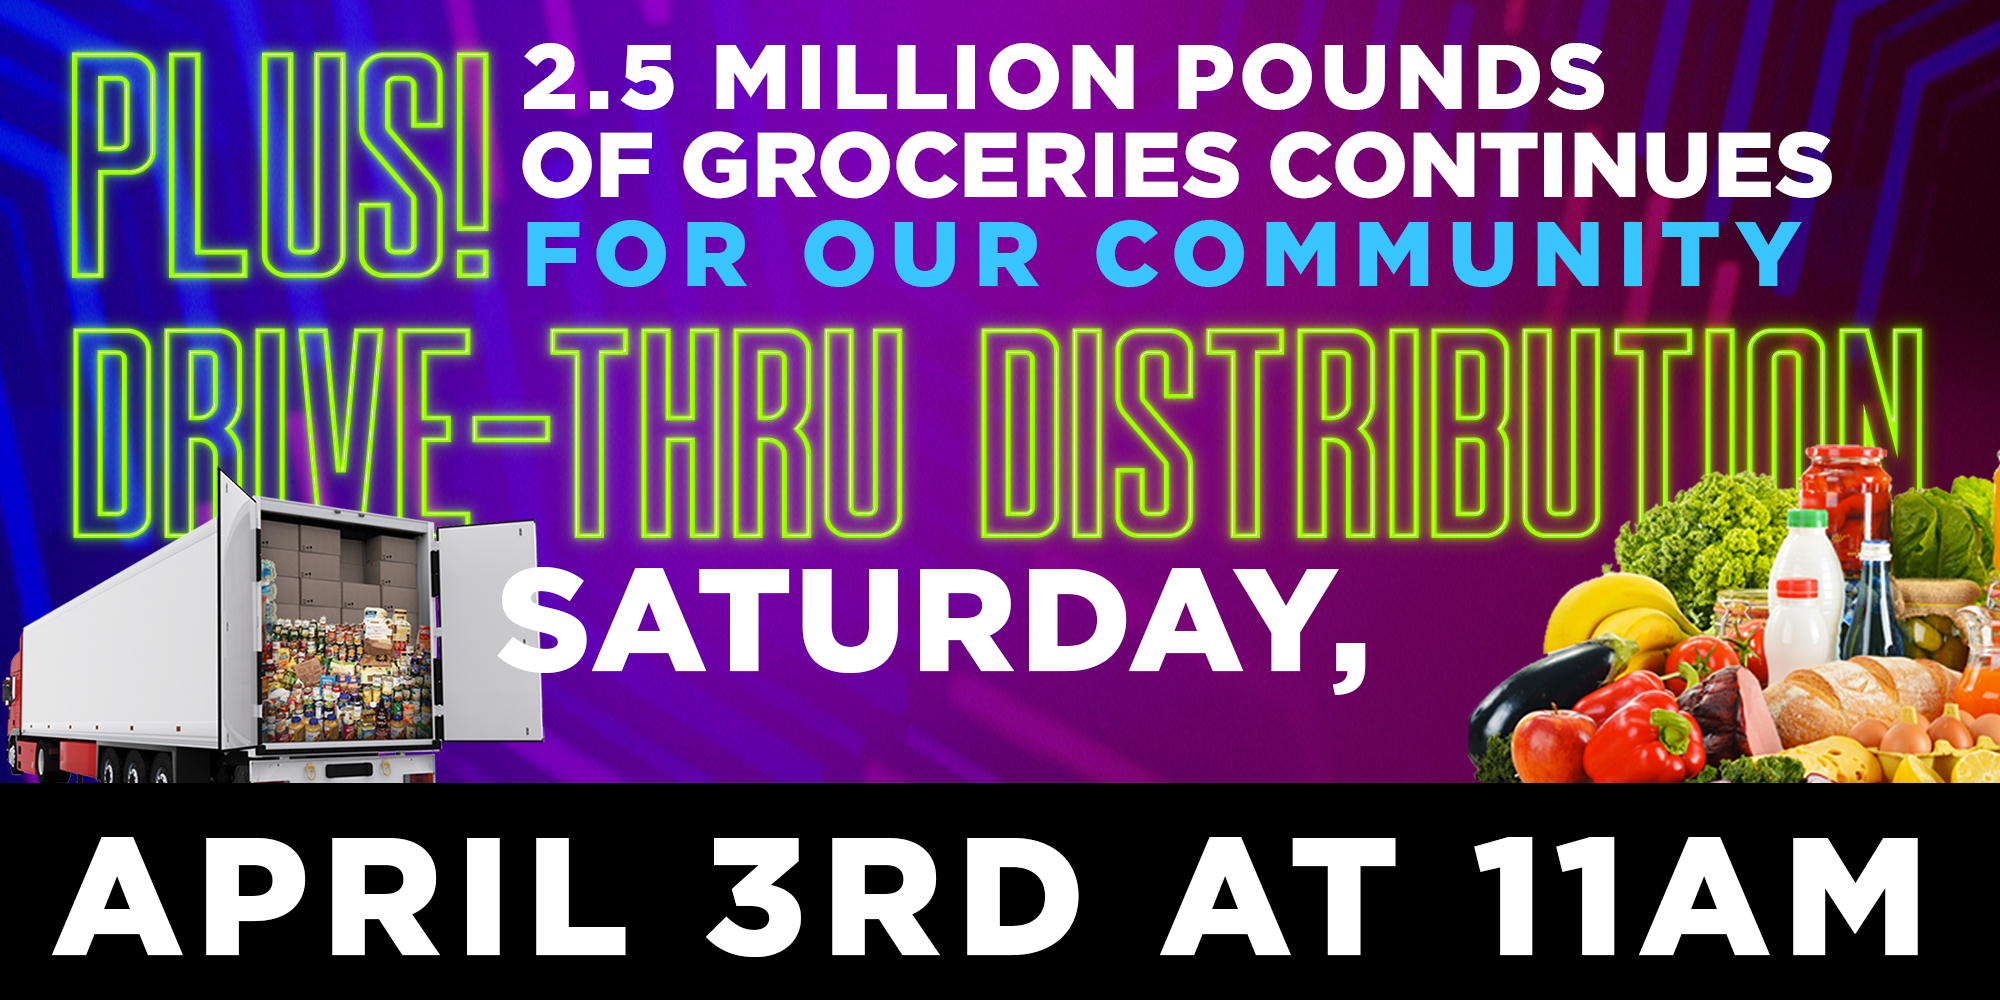 Plus! 2.5 Million Pounds of Groceries Continues for Our Community Drive-Thru Distribution Saturday, April 3rd at 11AM